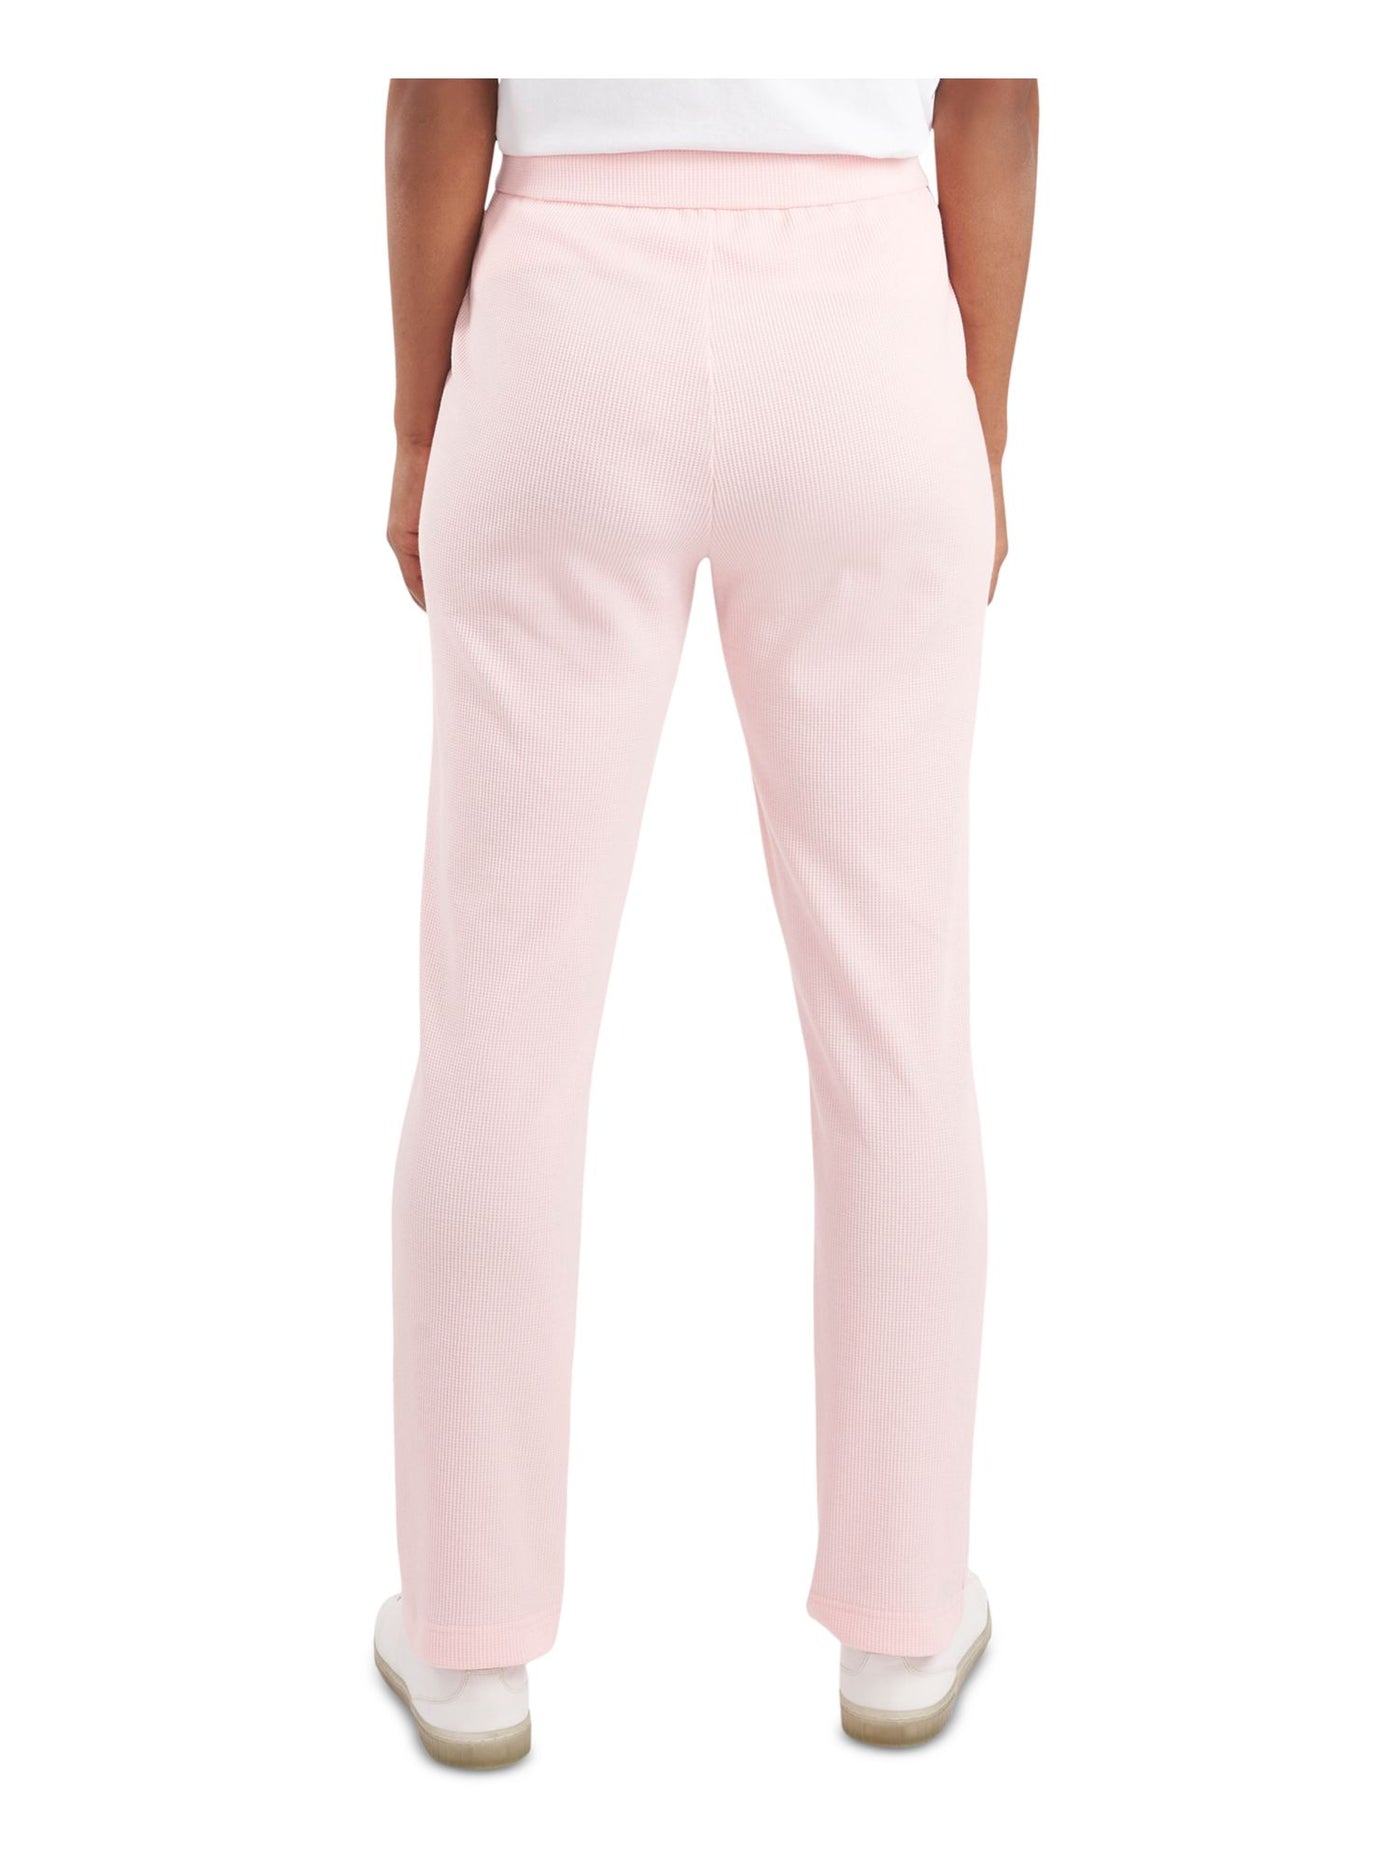 RILEY&RAE Womens Pink Stretch Pocketed Tie Waffle Knit Drawstring Lounge Pants S